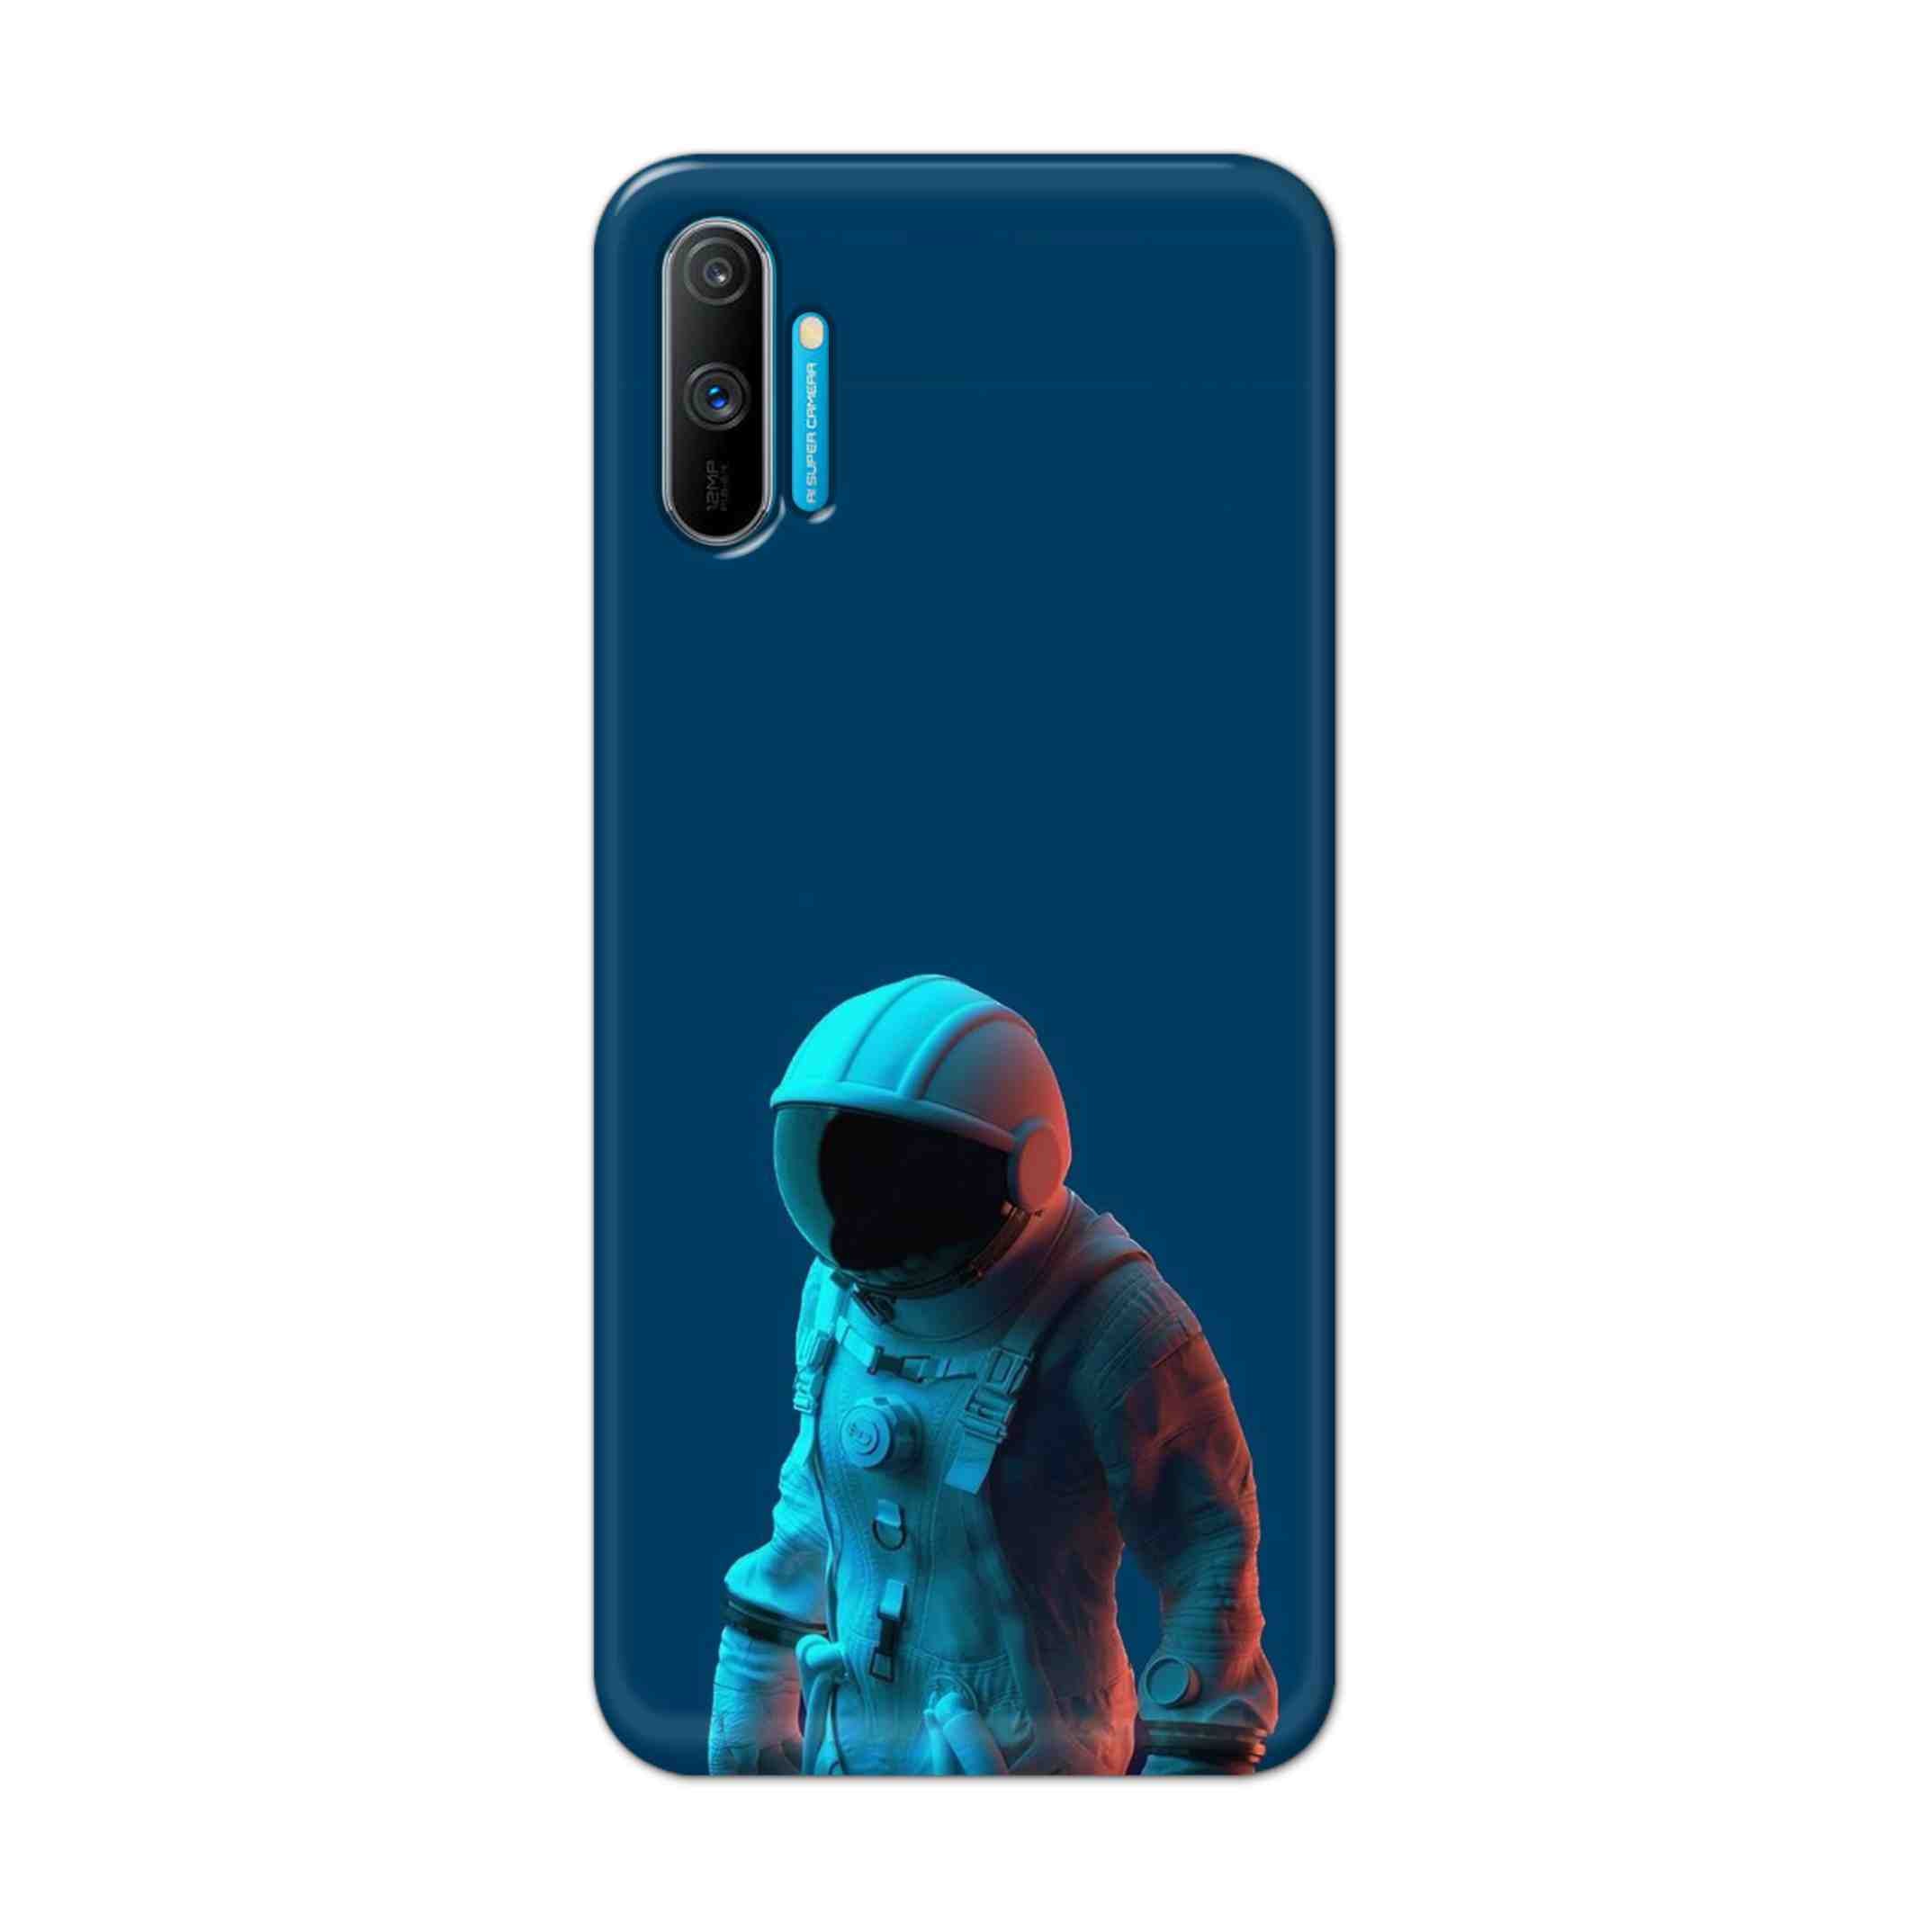 Buy Blue Astronaut Hard Back Mobile Phone Case Cover For Realme C3 Online